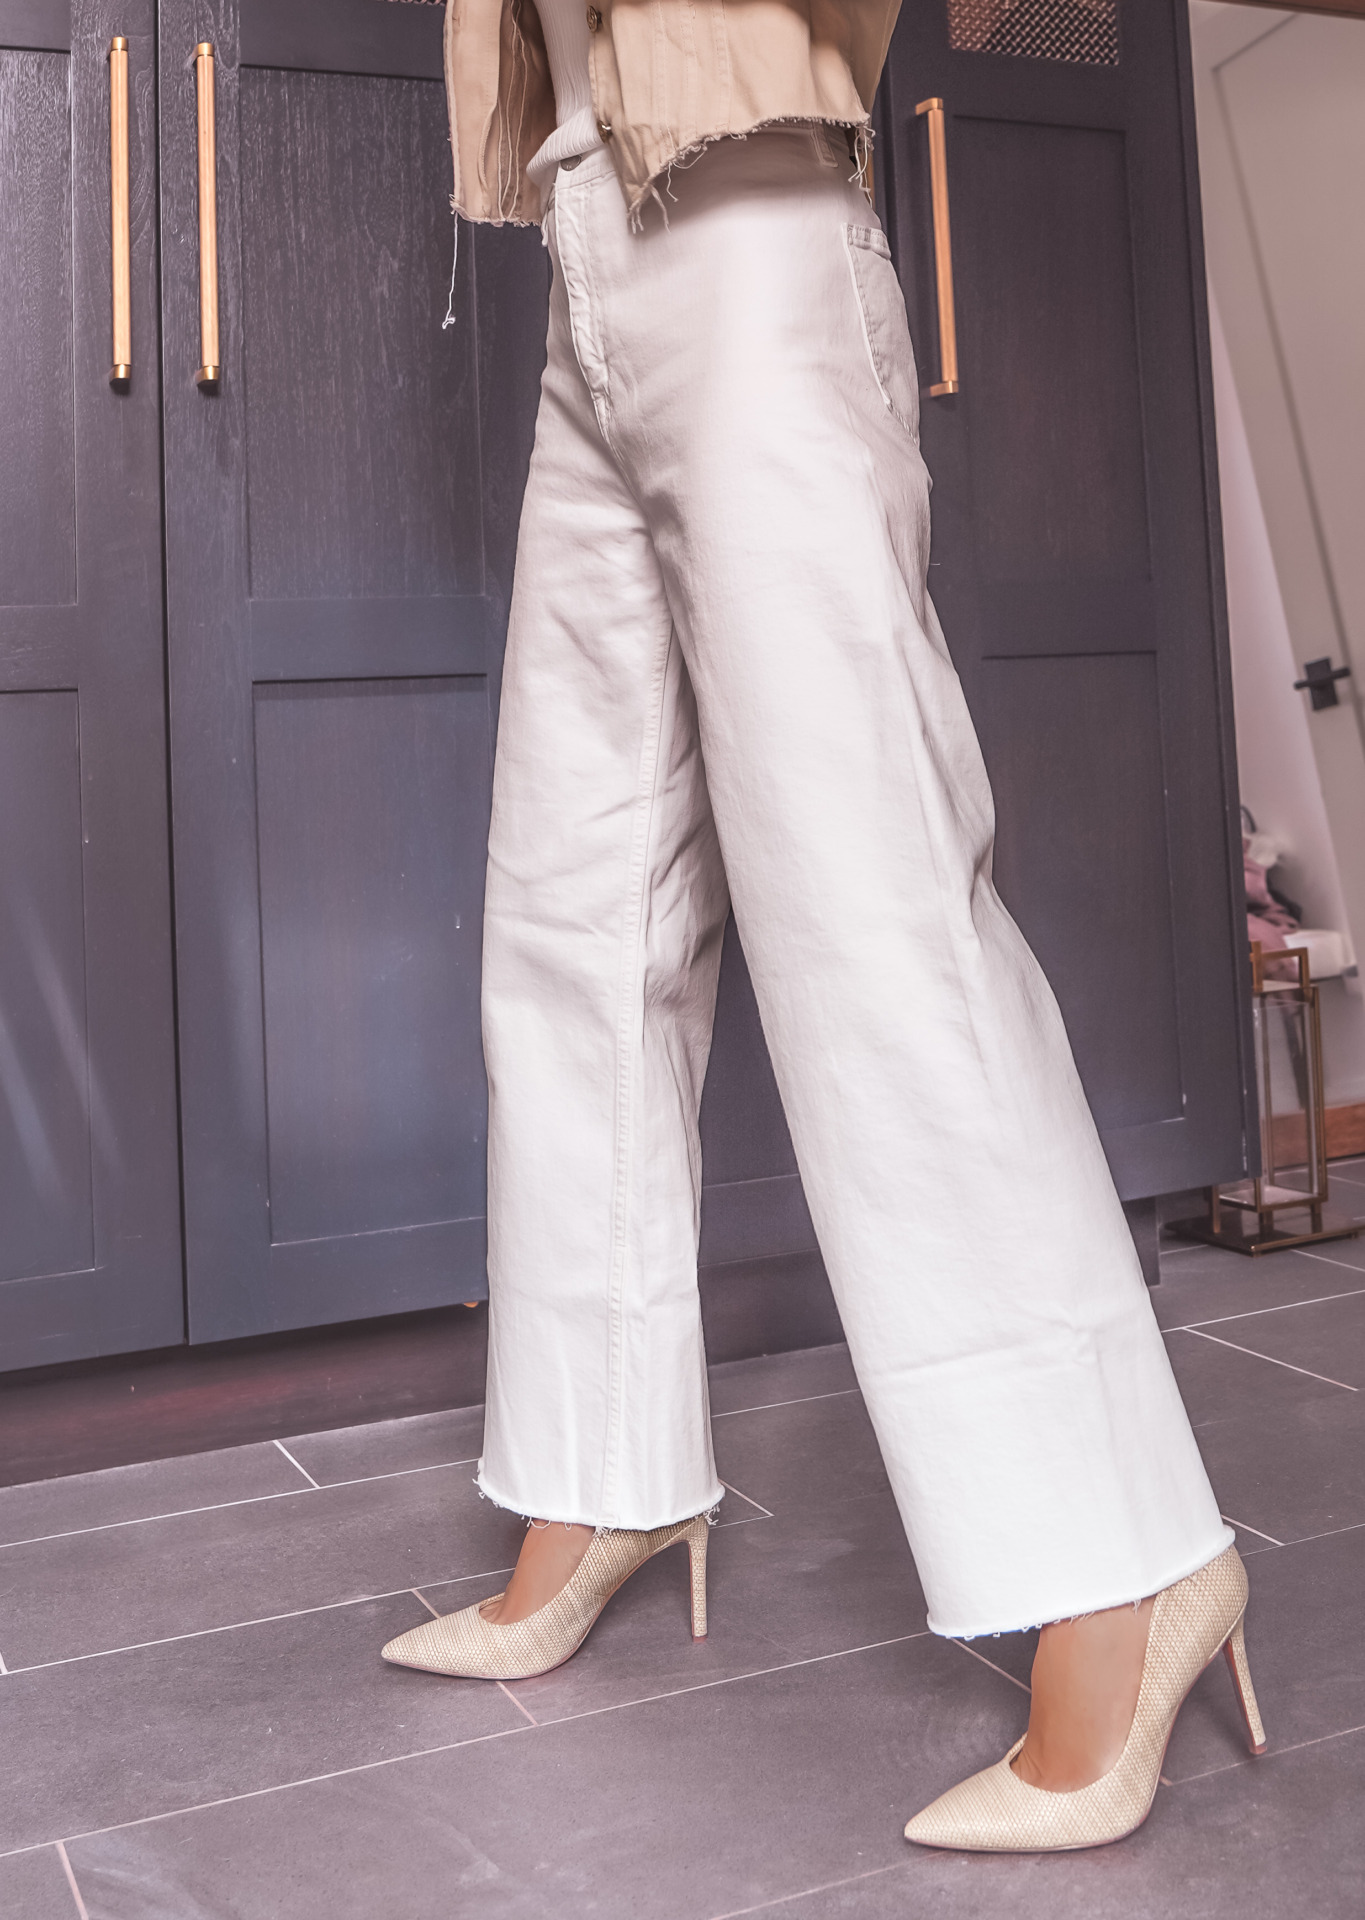 the perfect pair of white jeans for petite women by Pistola